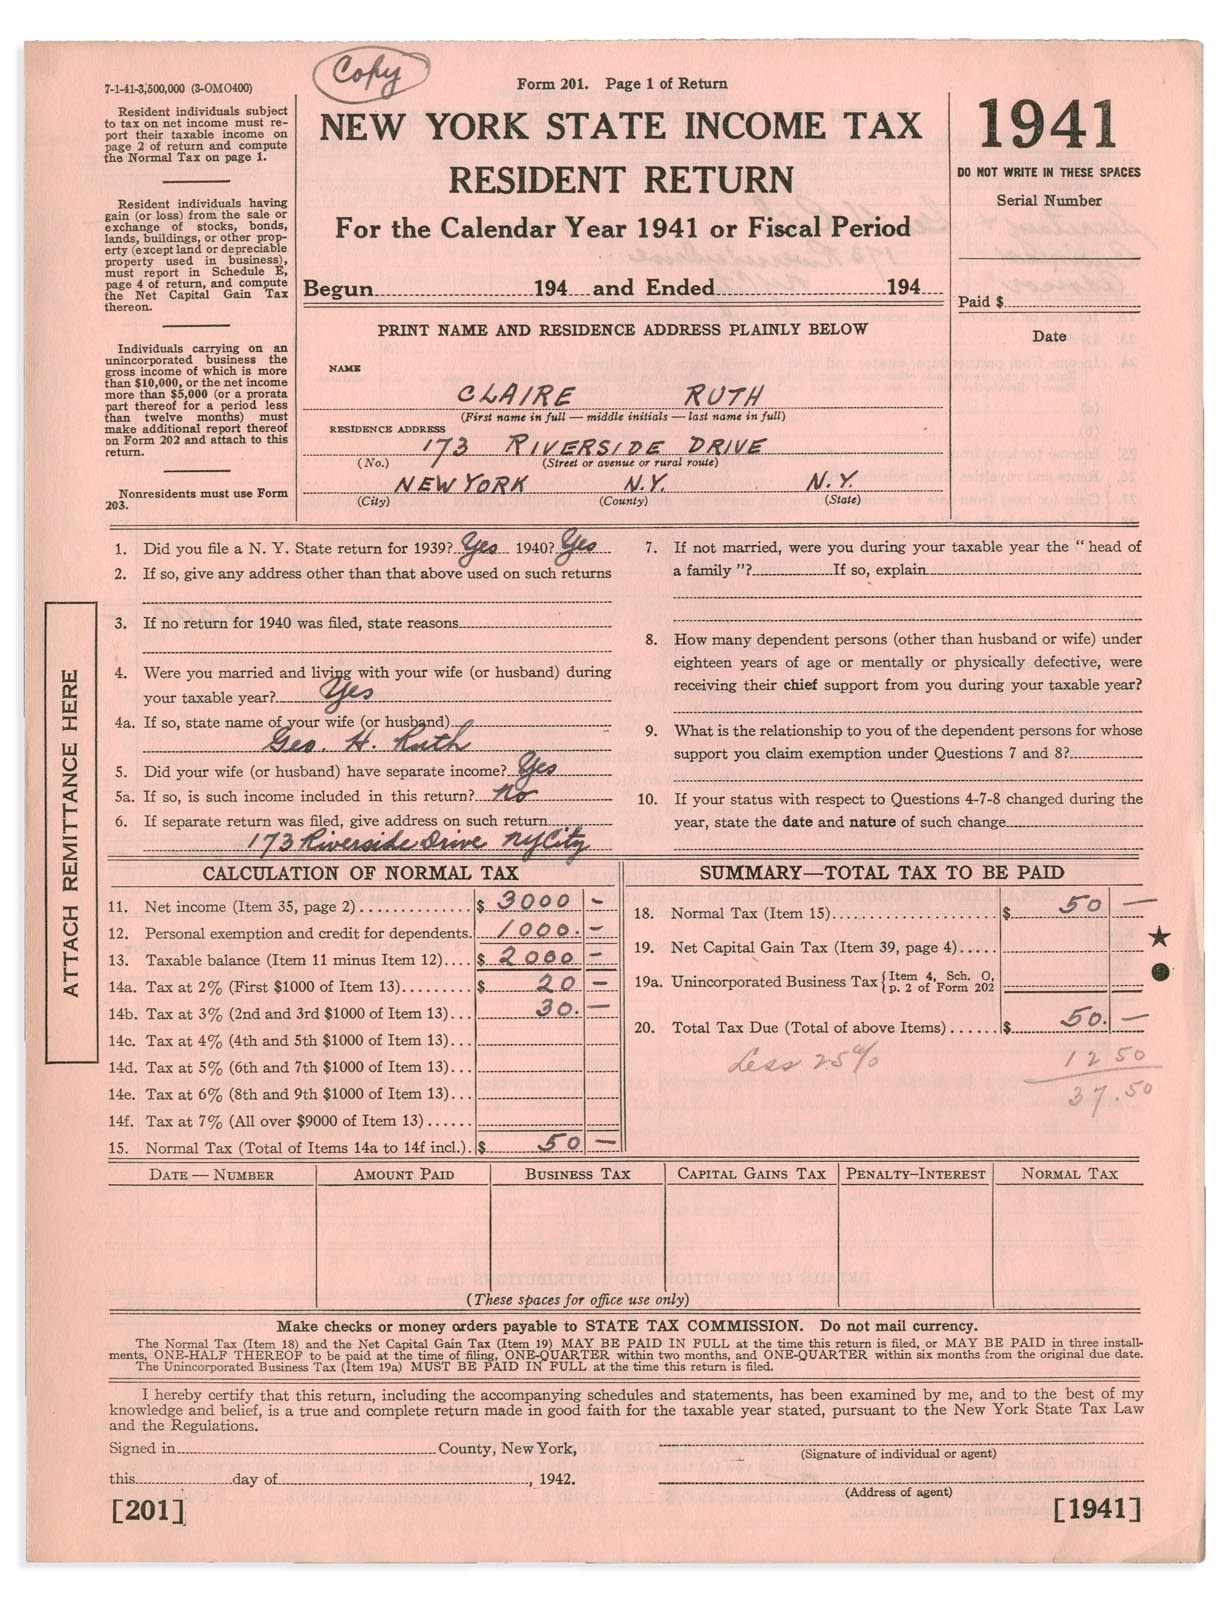 - 1939-41 Claire Ruth N.Y. State Income Tax Returns (3)